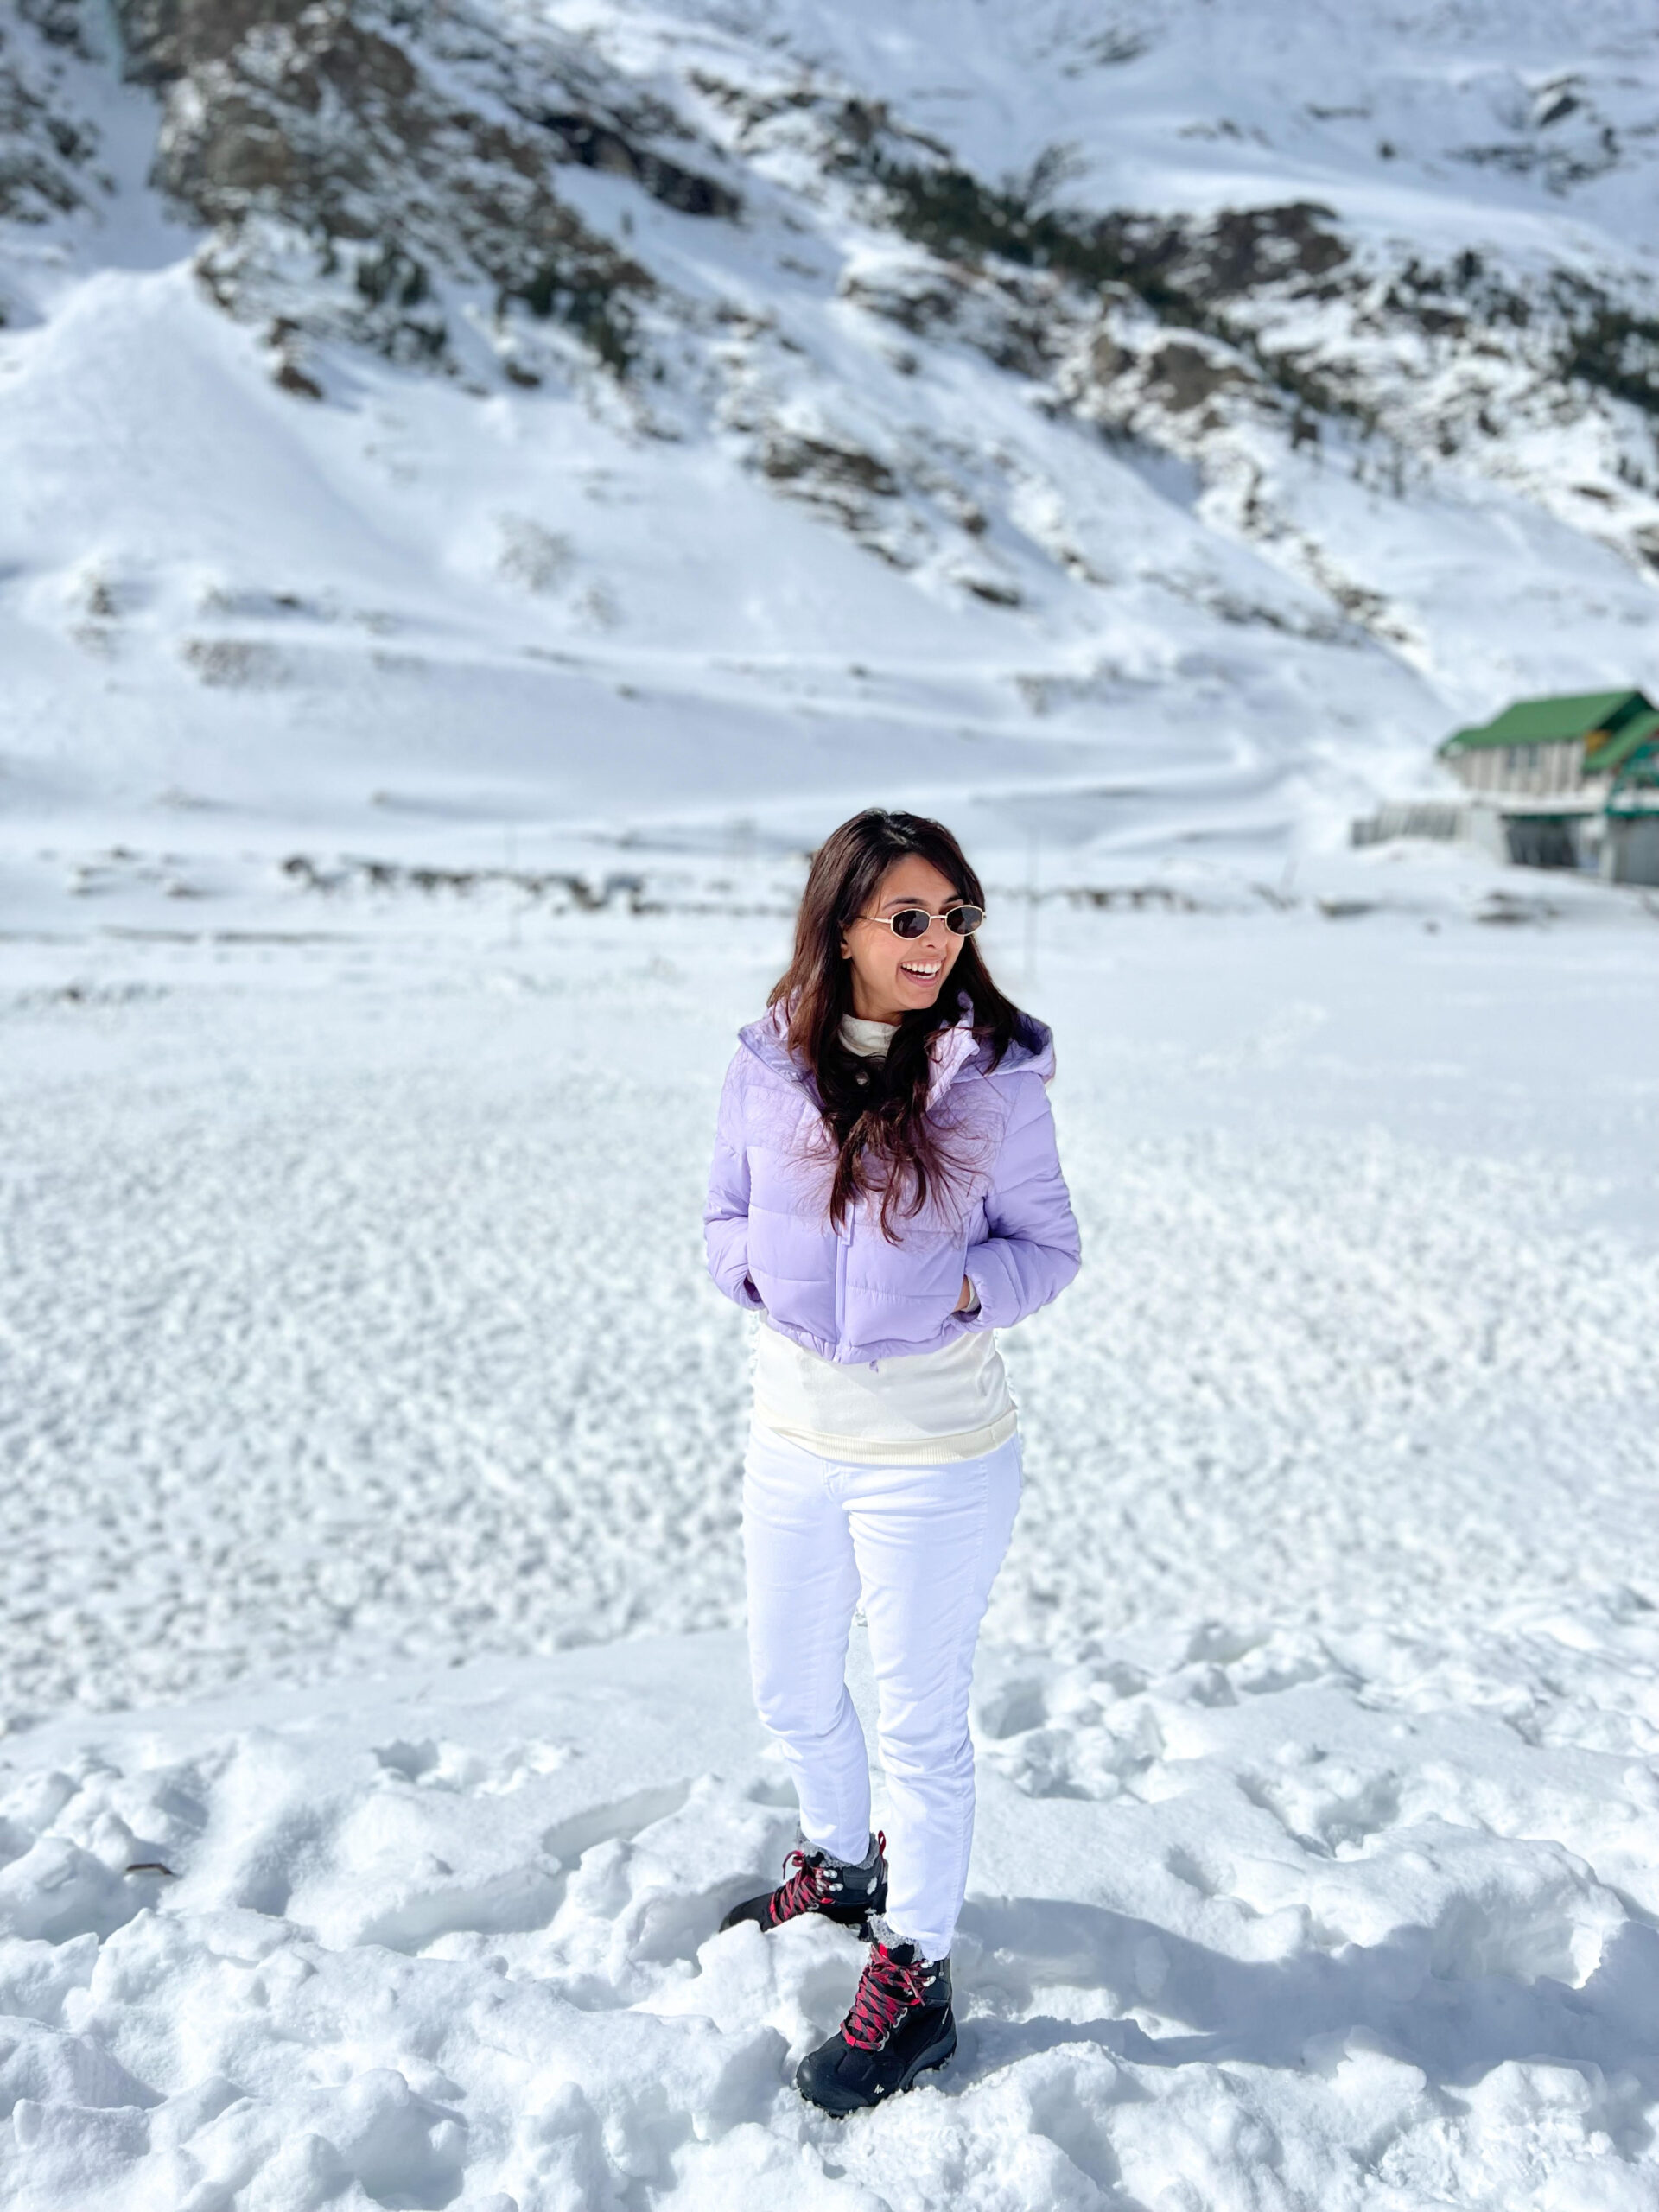 Manali- A snowy experience at the majestic mountains